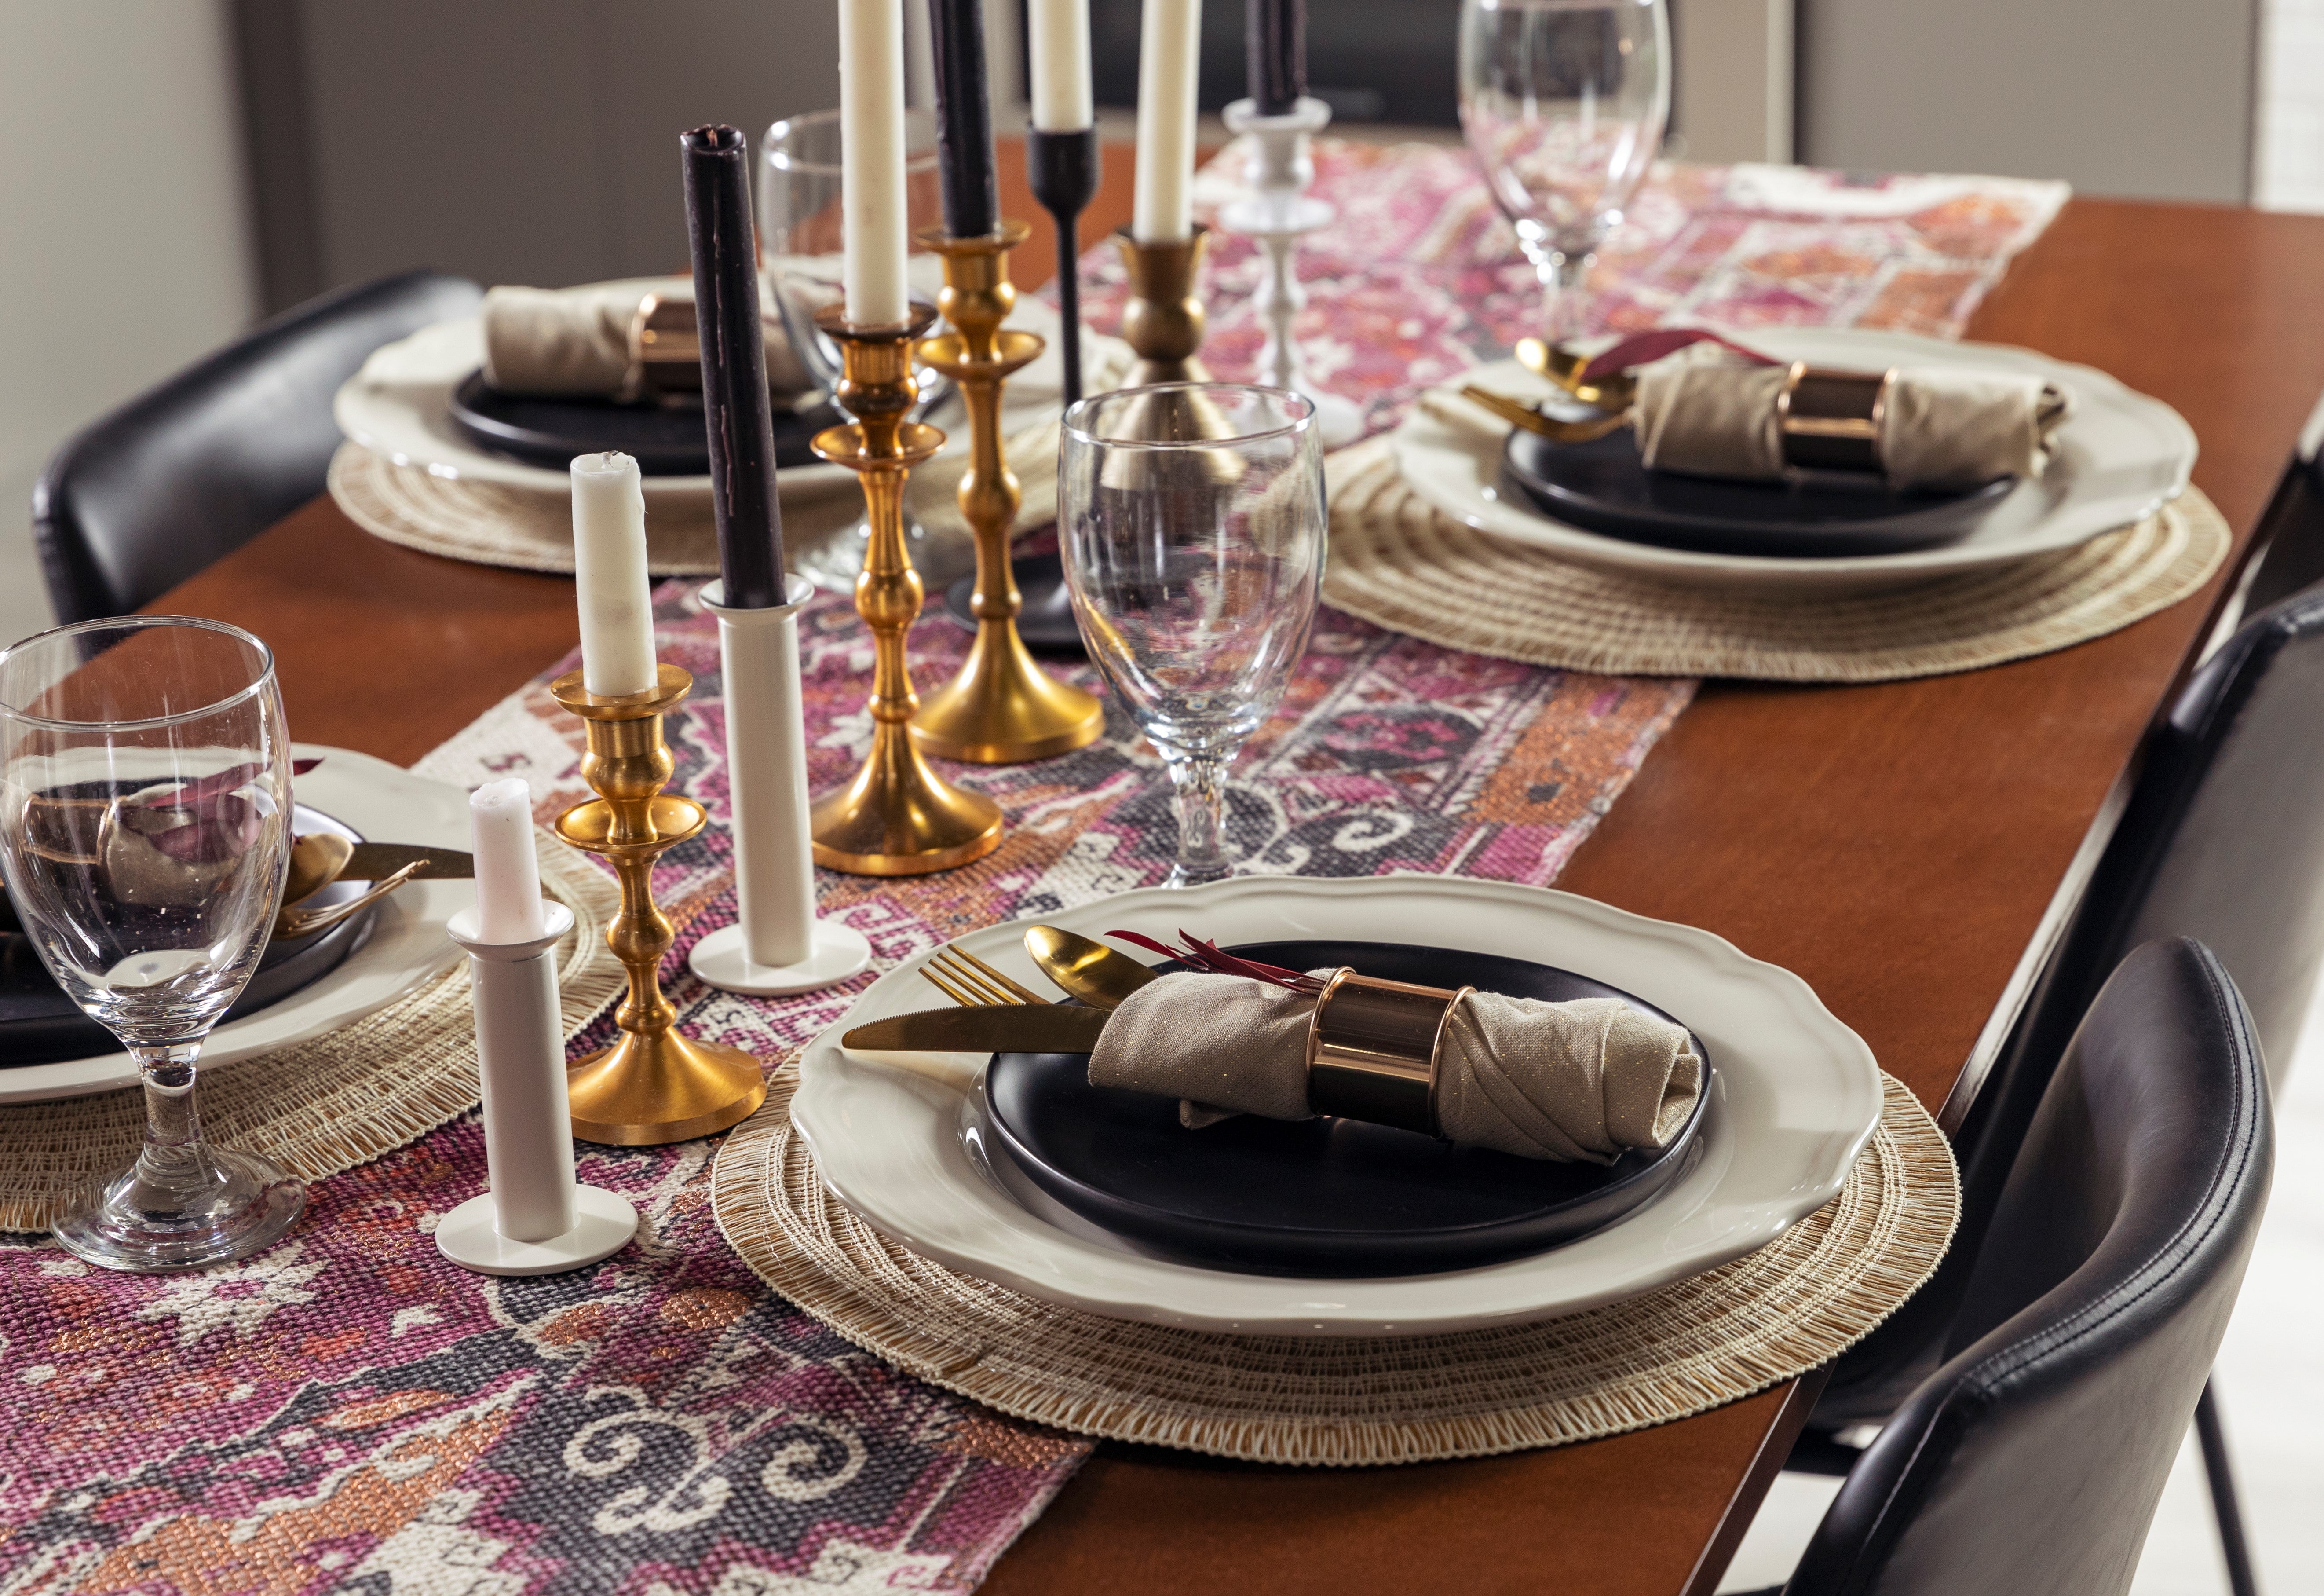 Linen Napkins  Let Yourself Experiment & Create the Ideal Tablescape